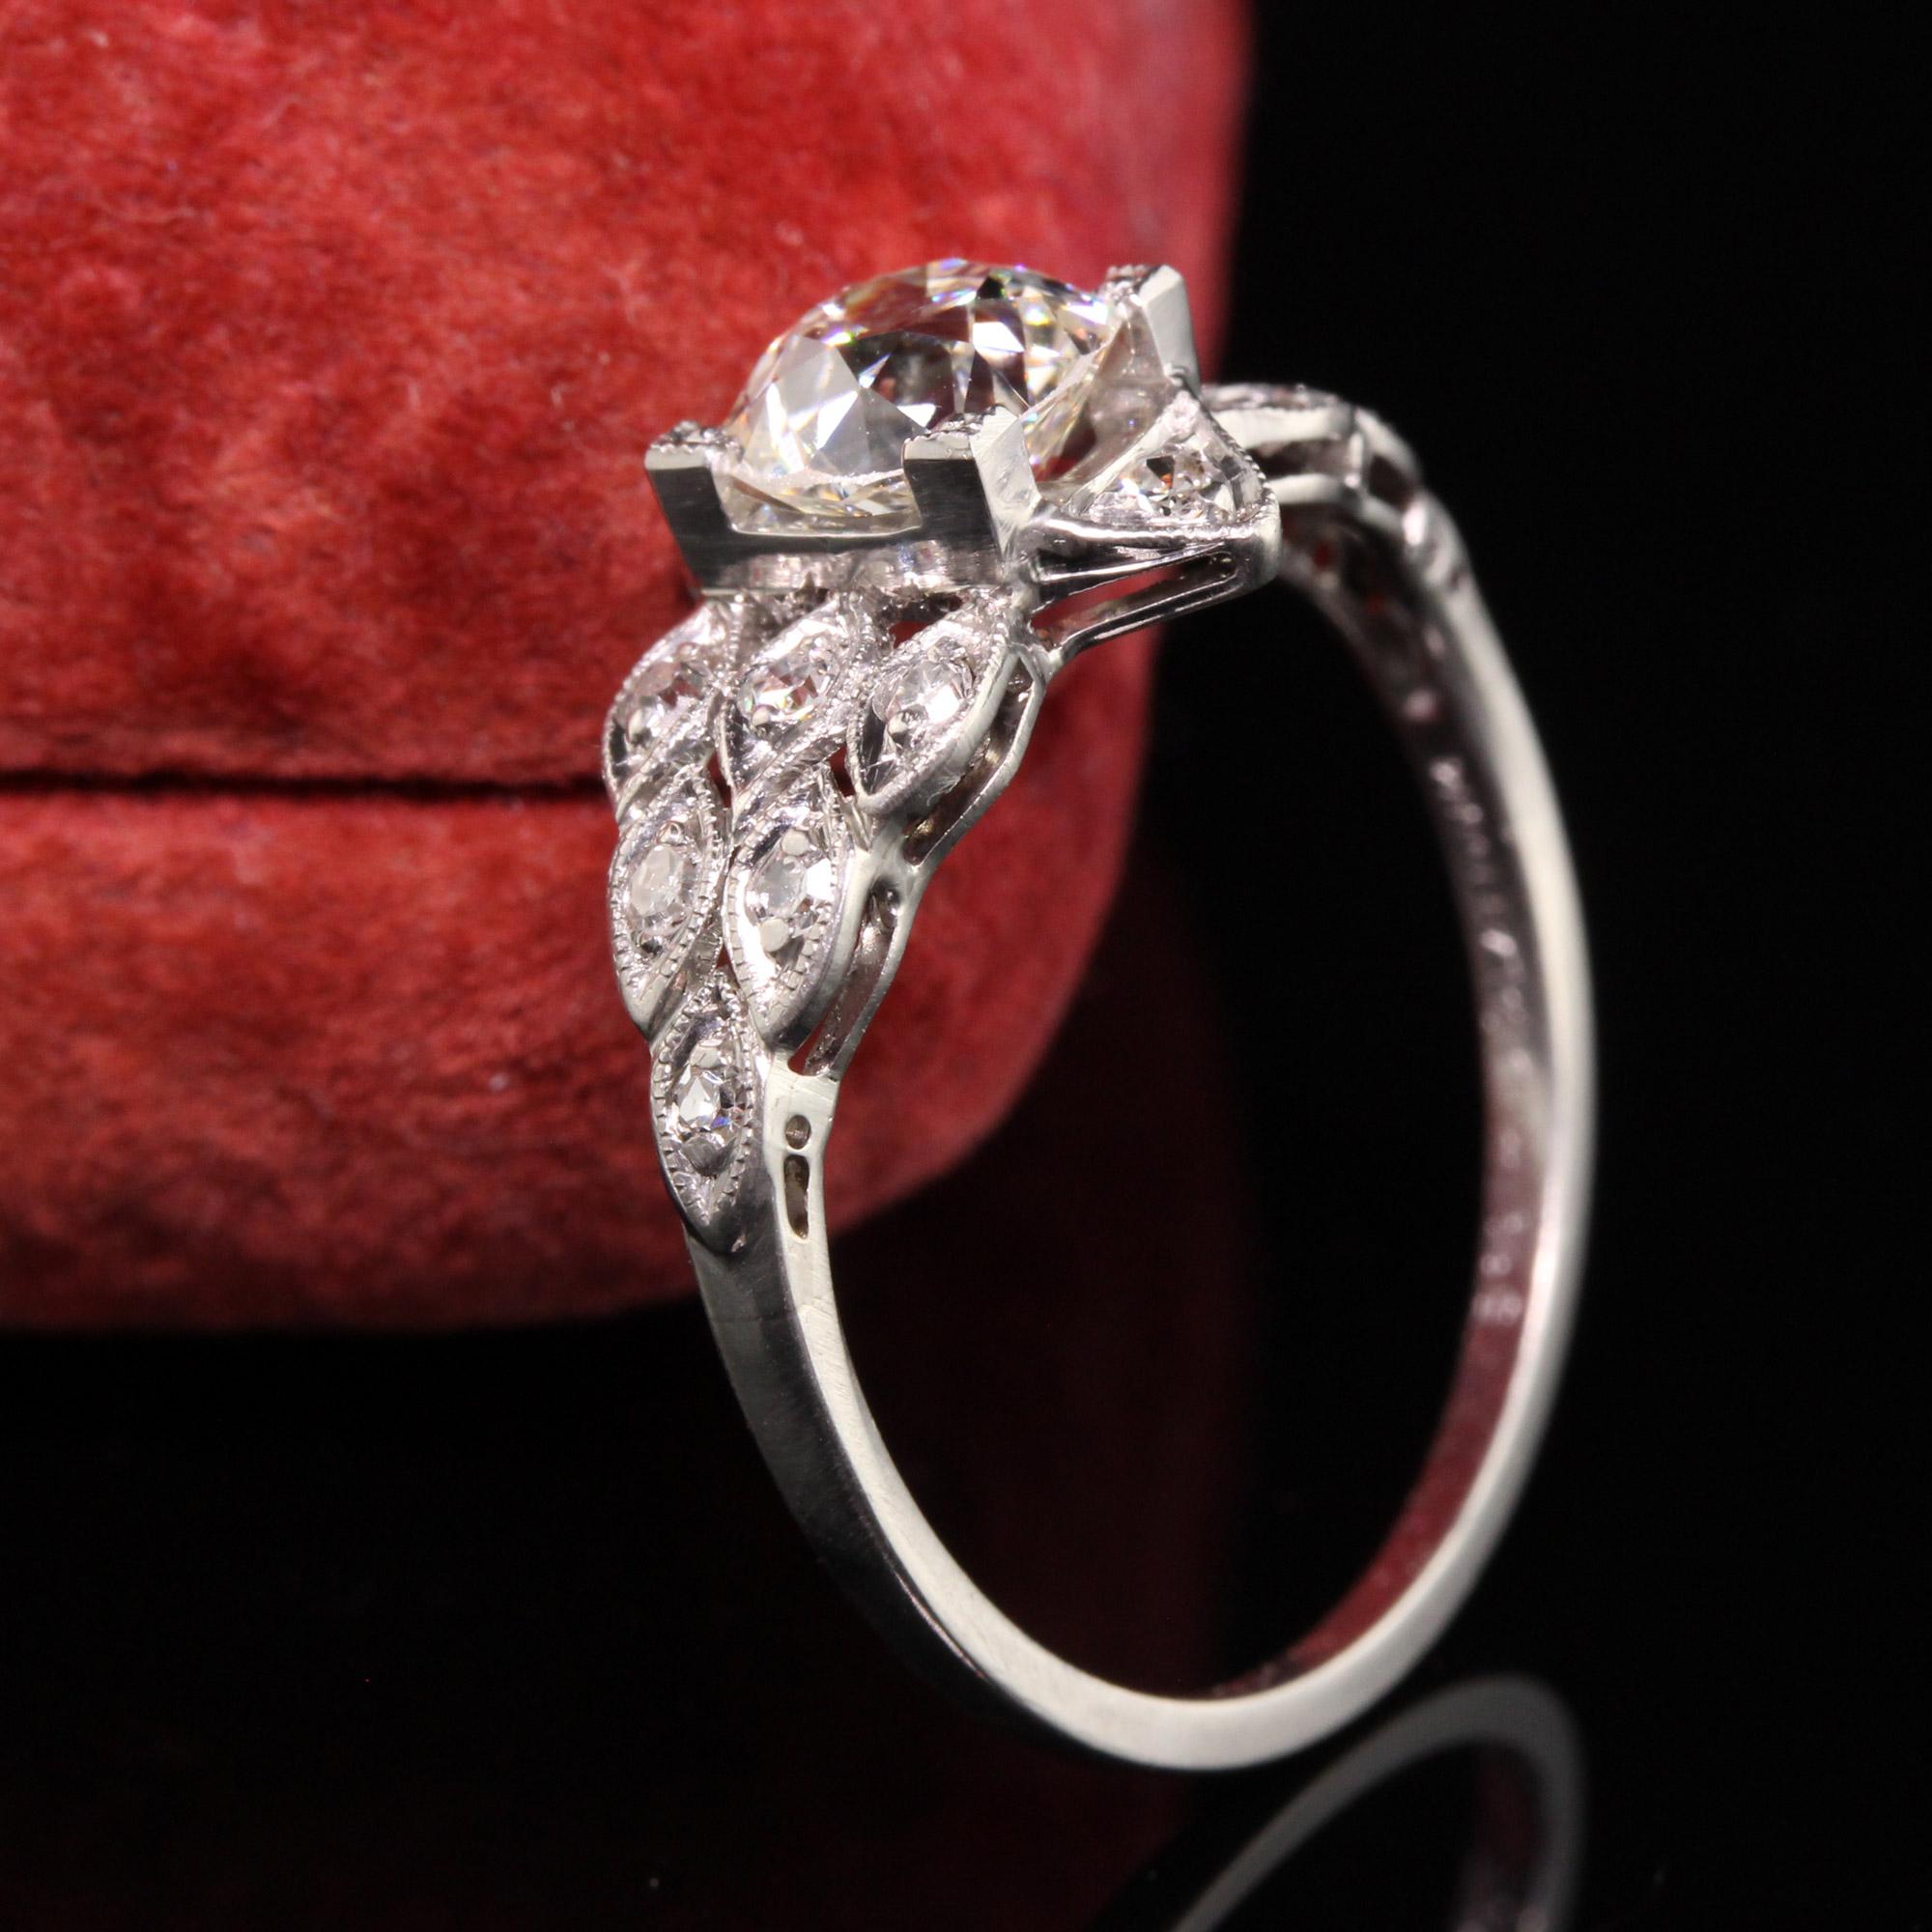 Beautiful Antique Art Deco Platinum Old Mine Cut Diamond Engagement Ring. This beautiful art deco diamond engagement ring features a gorgeous old mine cut diamond in the center of a beautiful art deco mounting with single cut diamonds on all